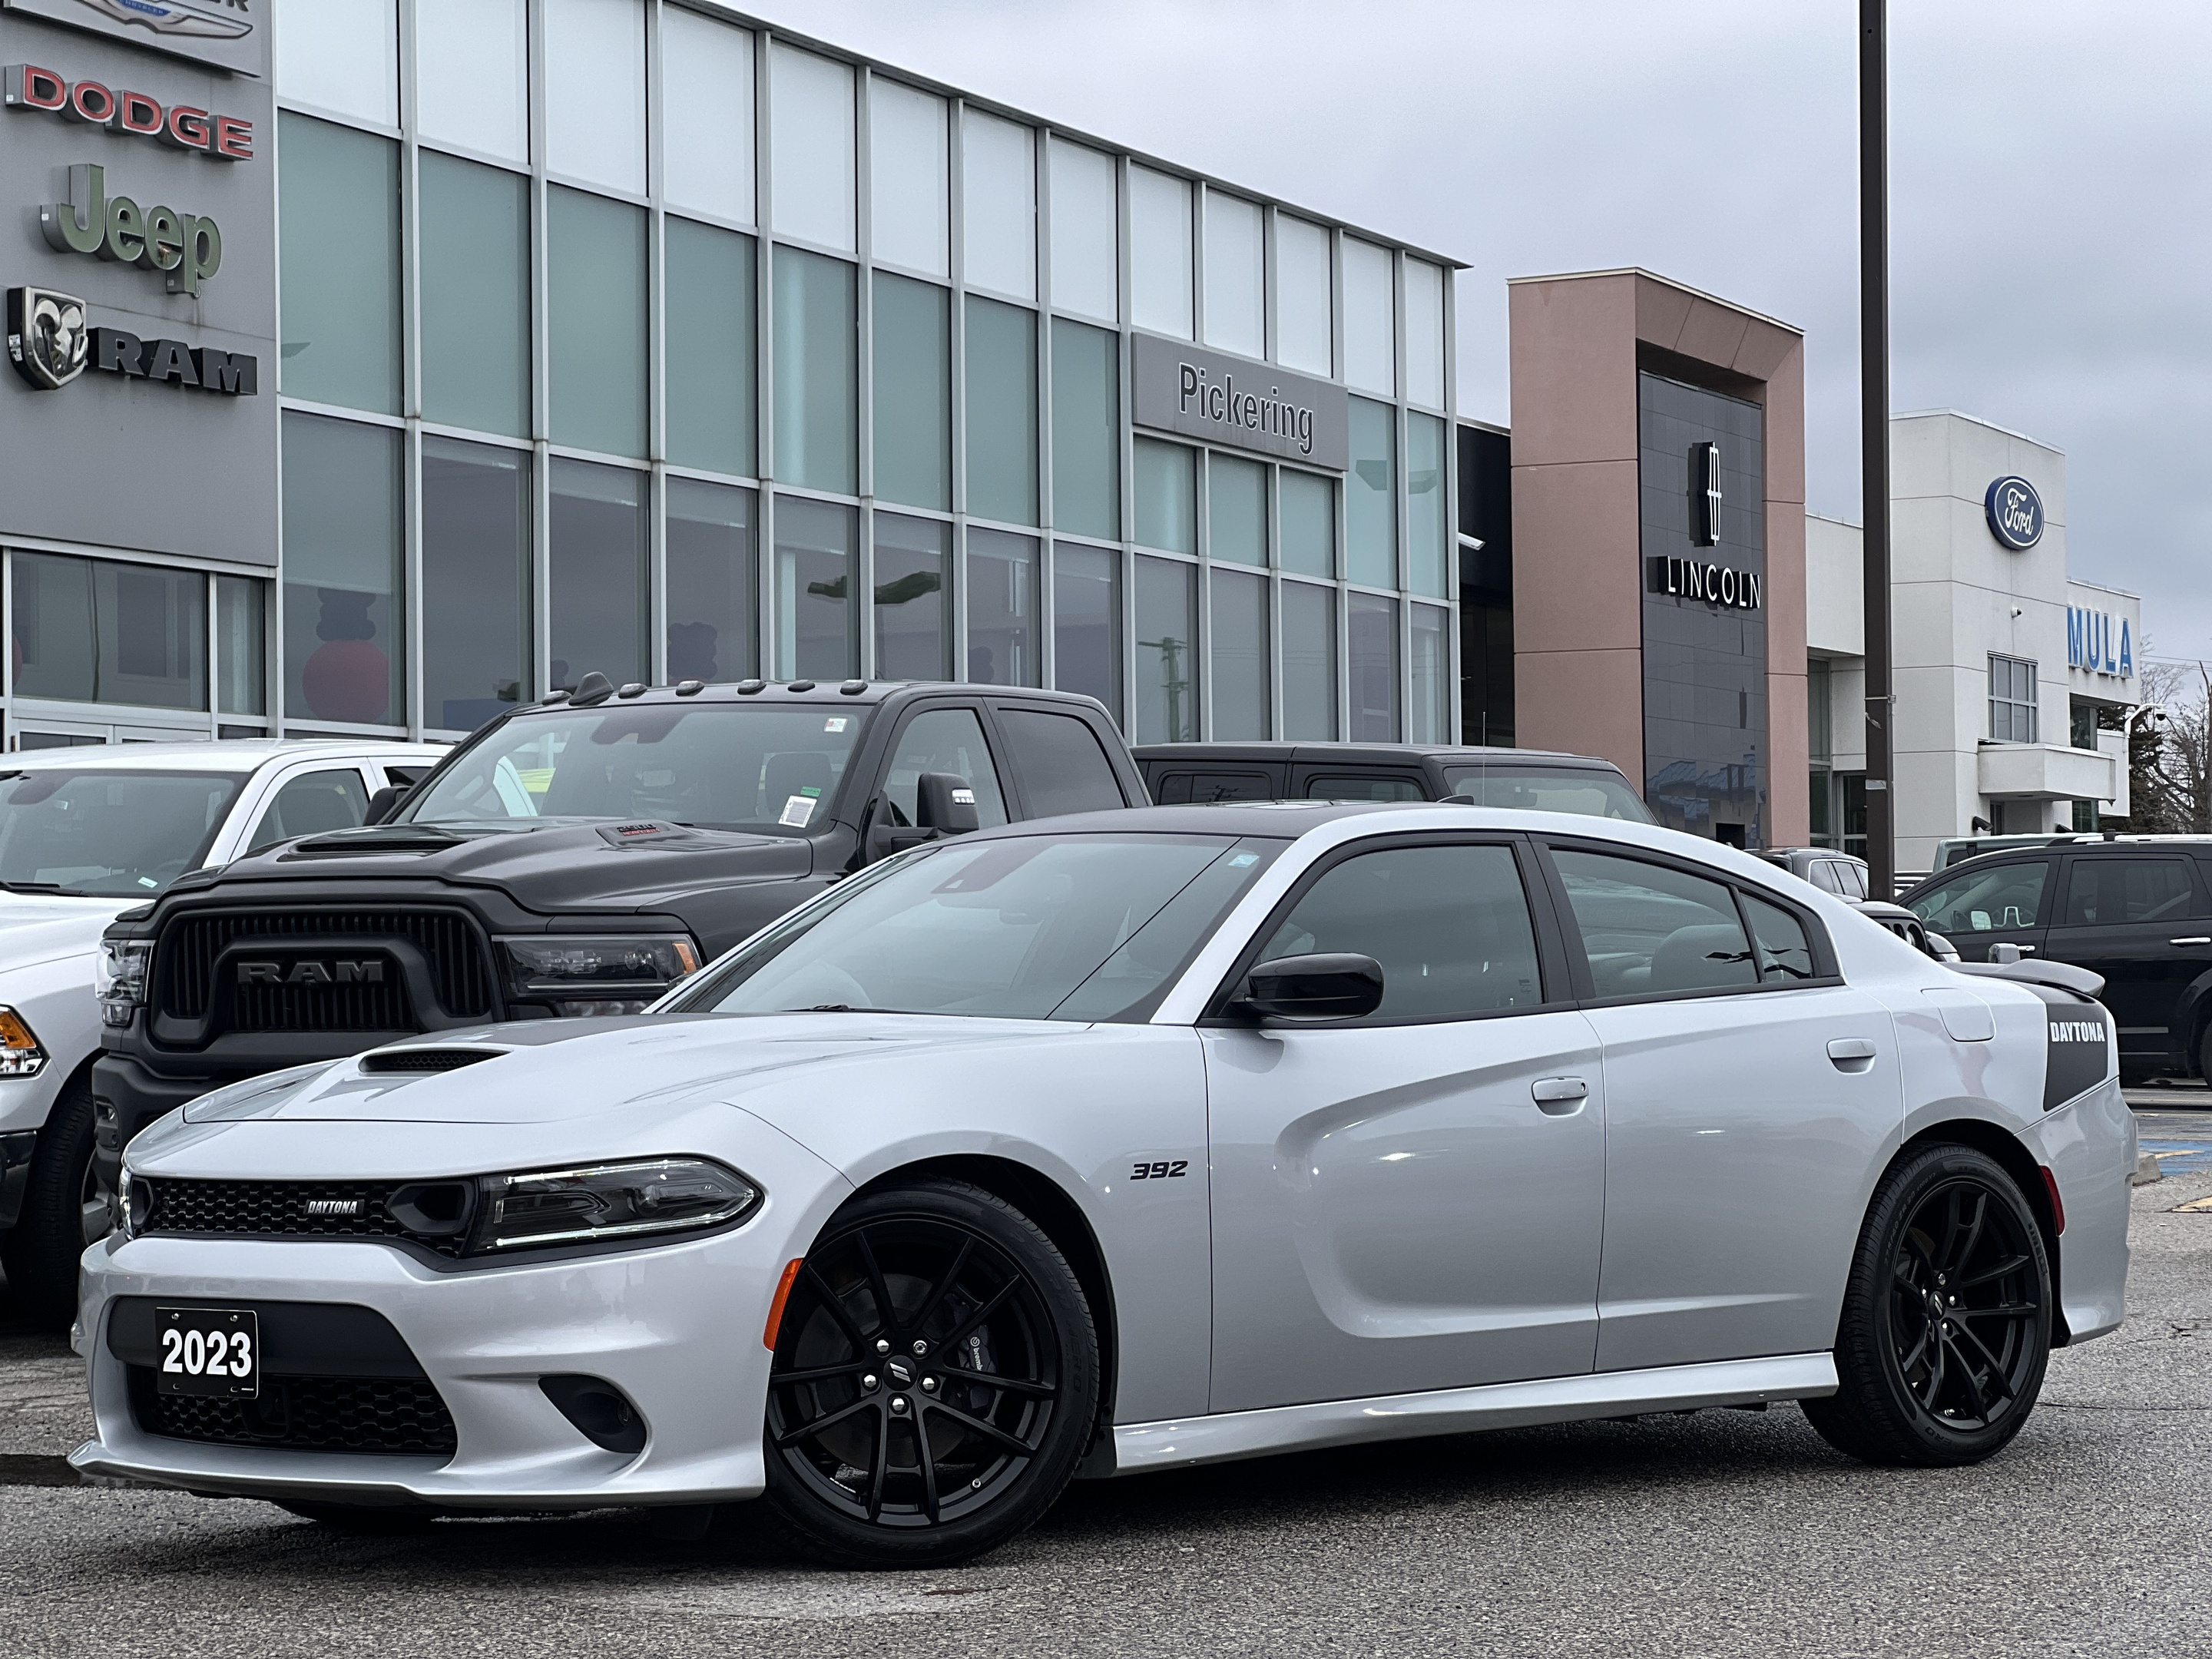 2023 Dodge Charger R/T Scat Pack 392